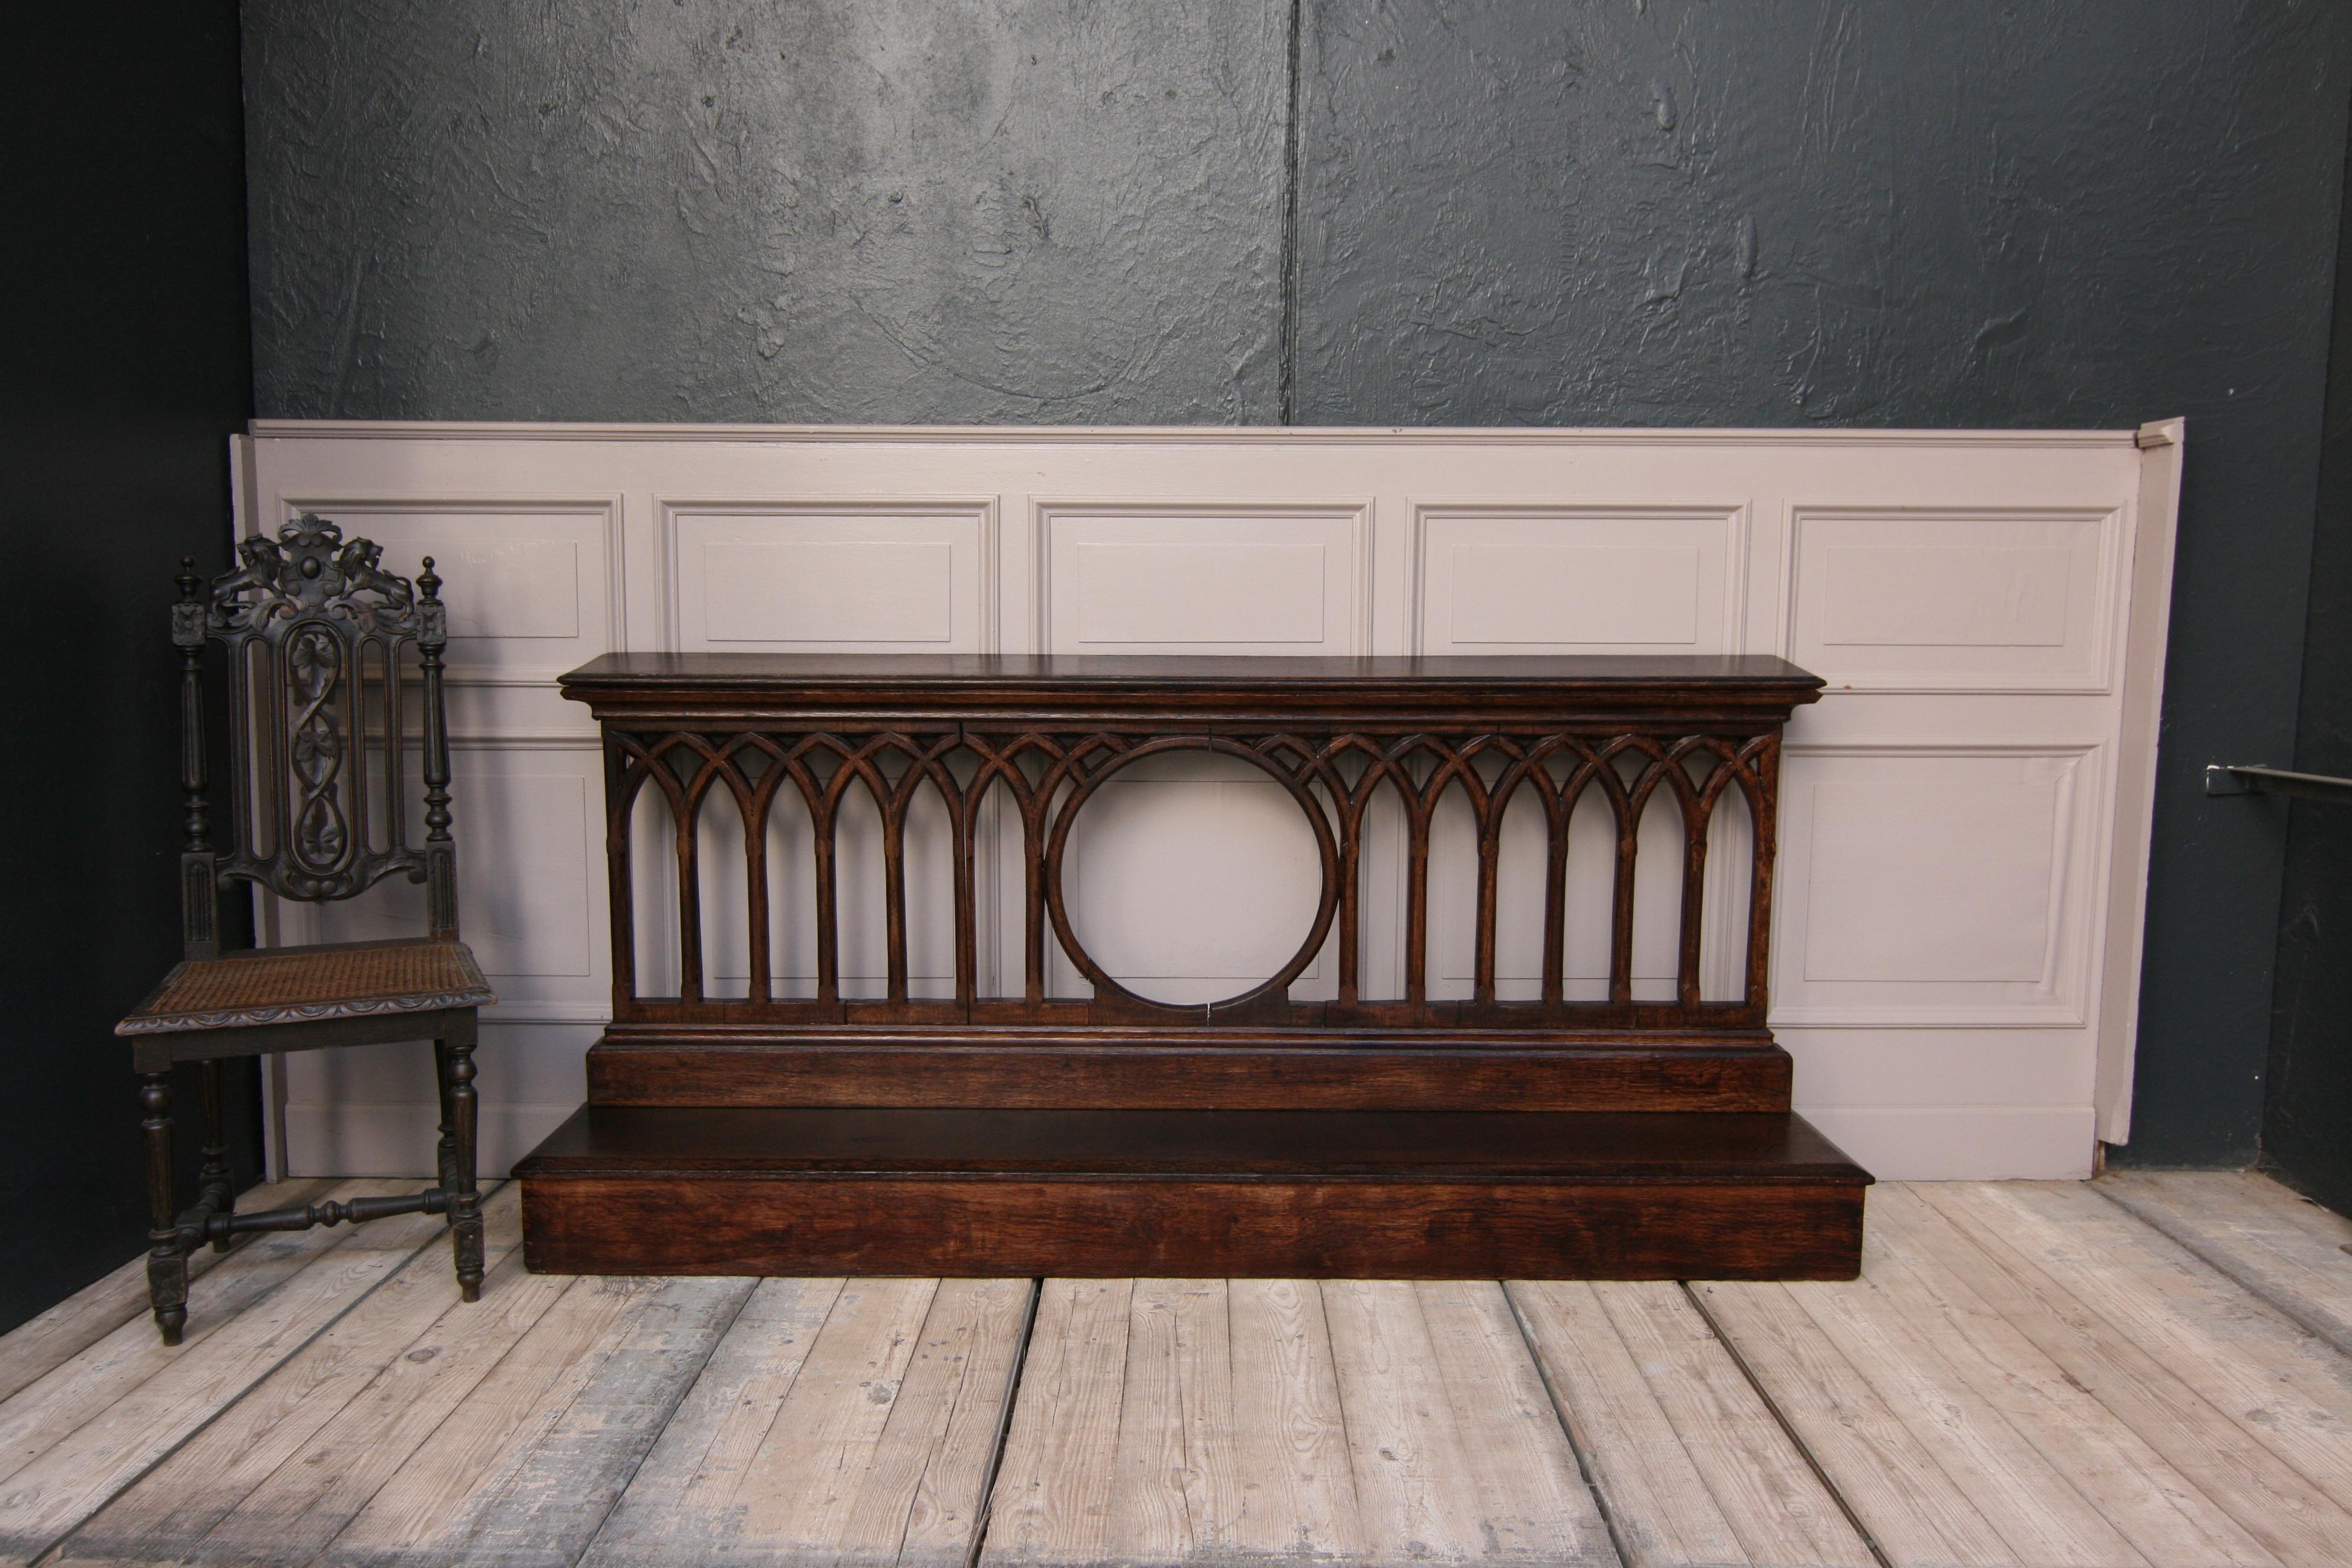 Original 19th century knee bench or prayer bench from a church in Gothic style. Made of solid oak. Restored ready for living and now ideally usable as a console. E.g. for hallways.